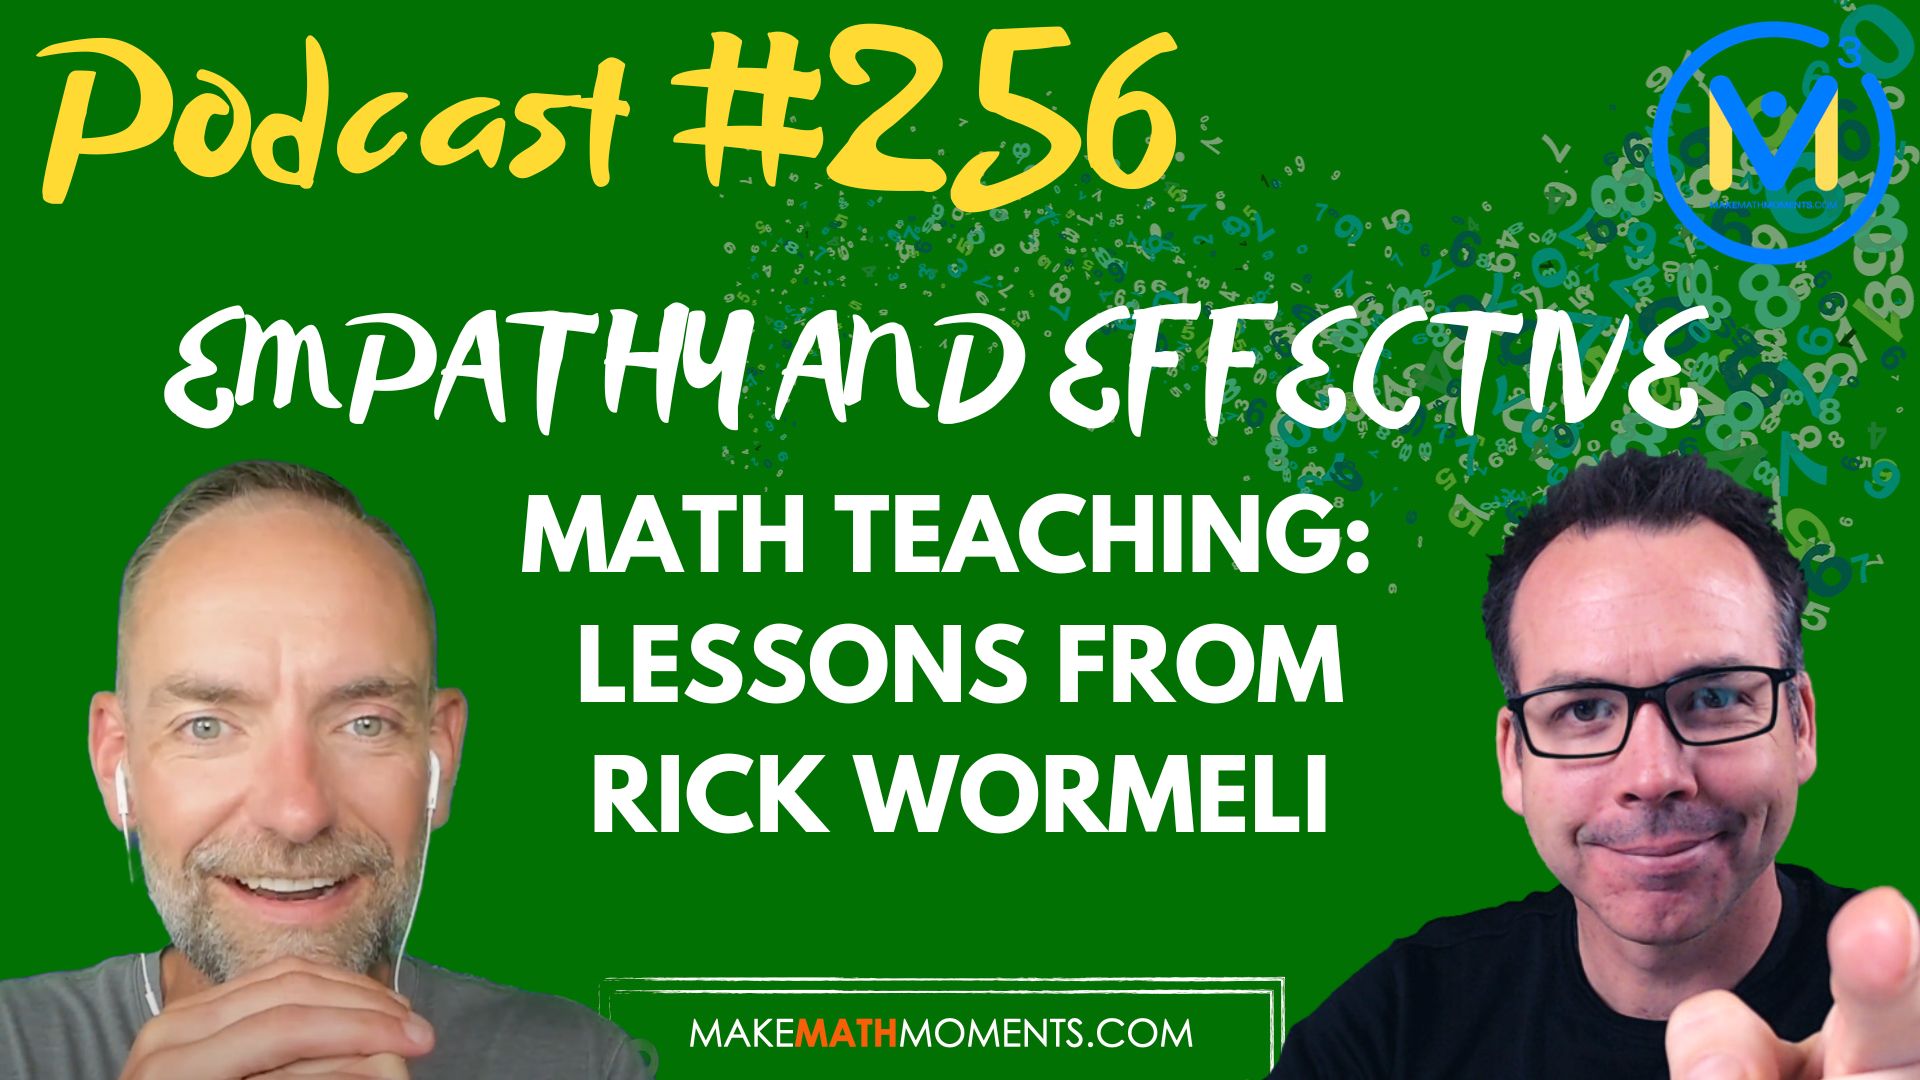 Episode #256: Empathy and Effective Math Teaching: Lessons from Rick Wormeli